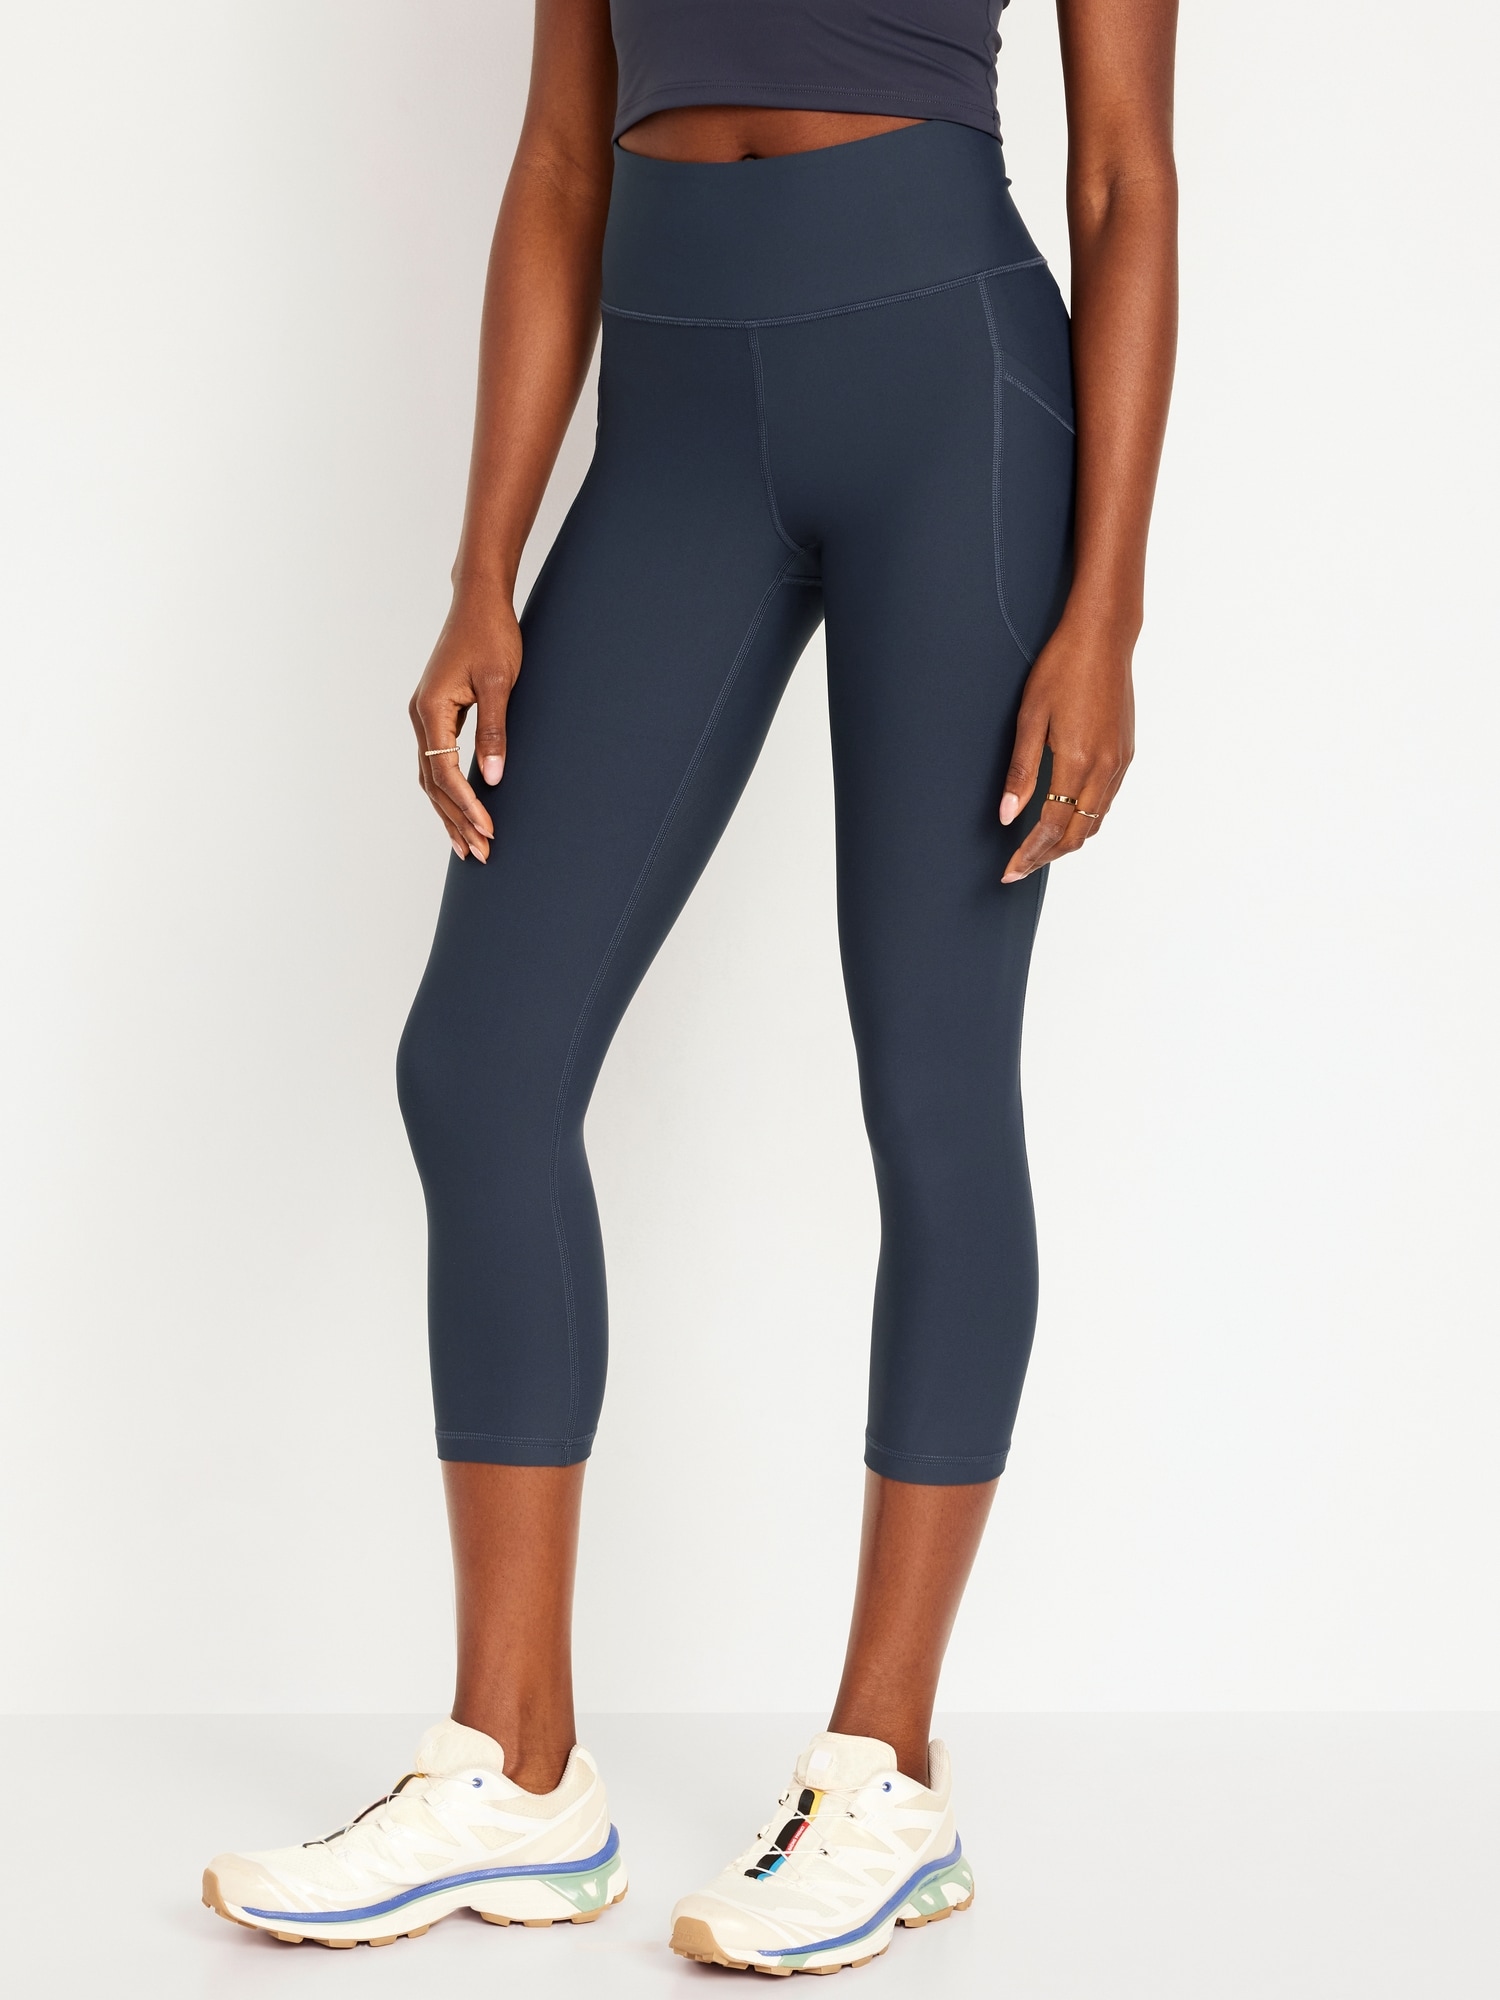 Old Navy High-Waisted PowerSoft 7/8 Mixed-Fabric Leggings for